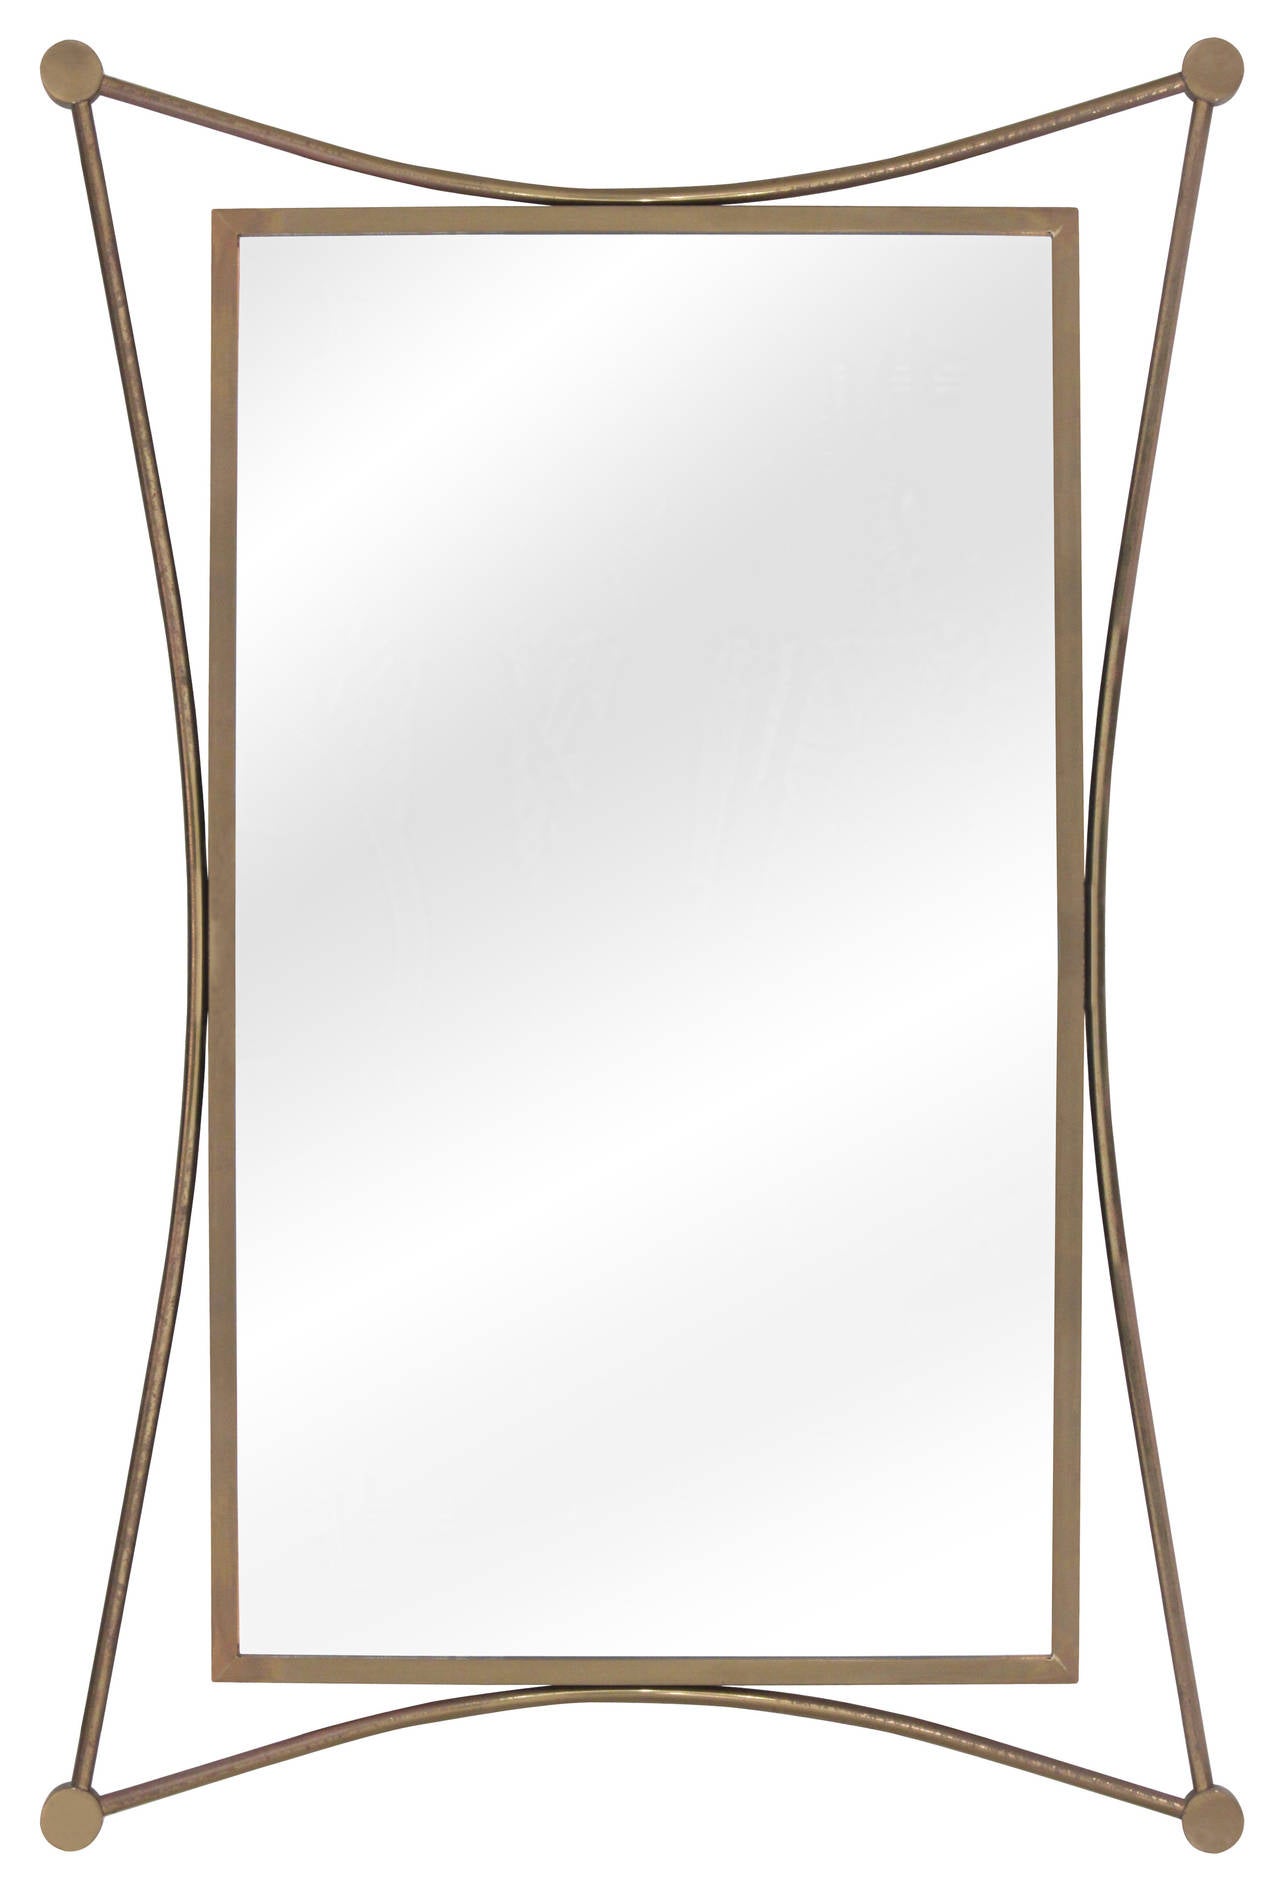 Atomic style rectangular mirror with frame in brass with concave sides, American 1950's

Configured for hanging horizontally or vertically